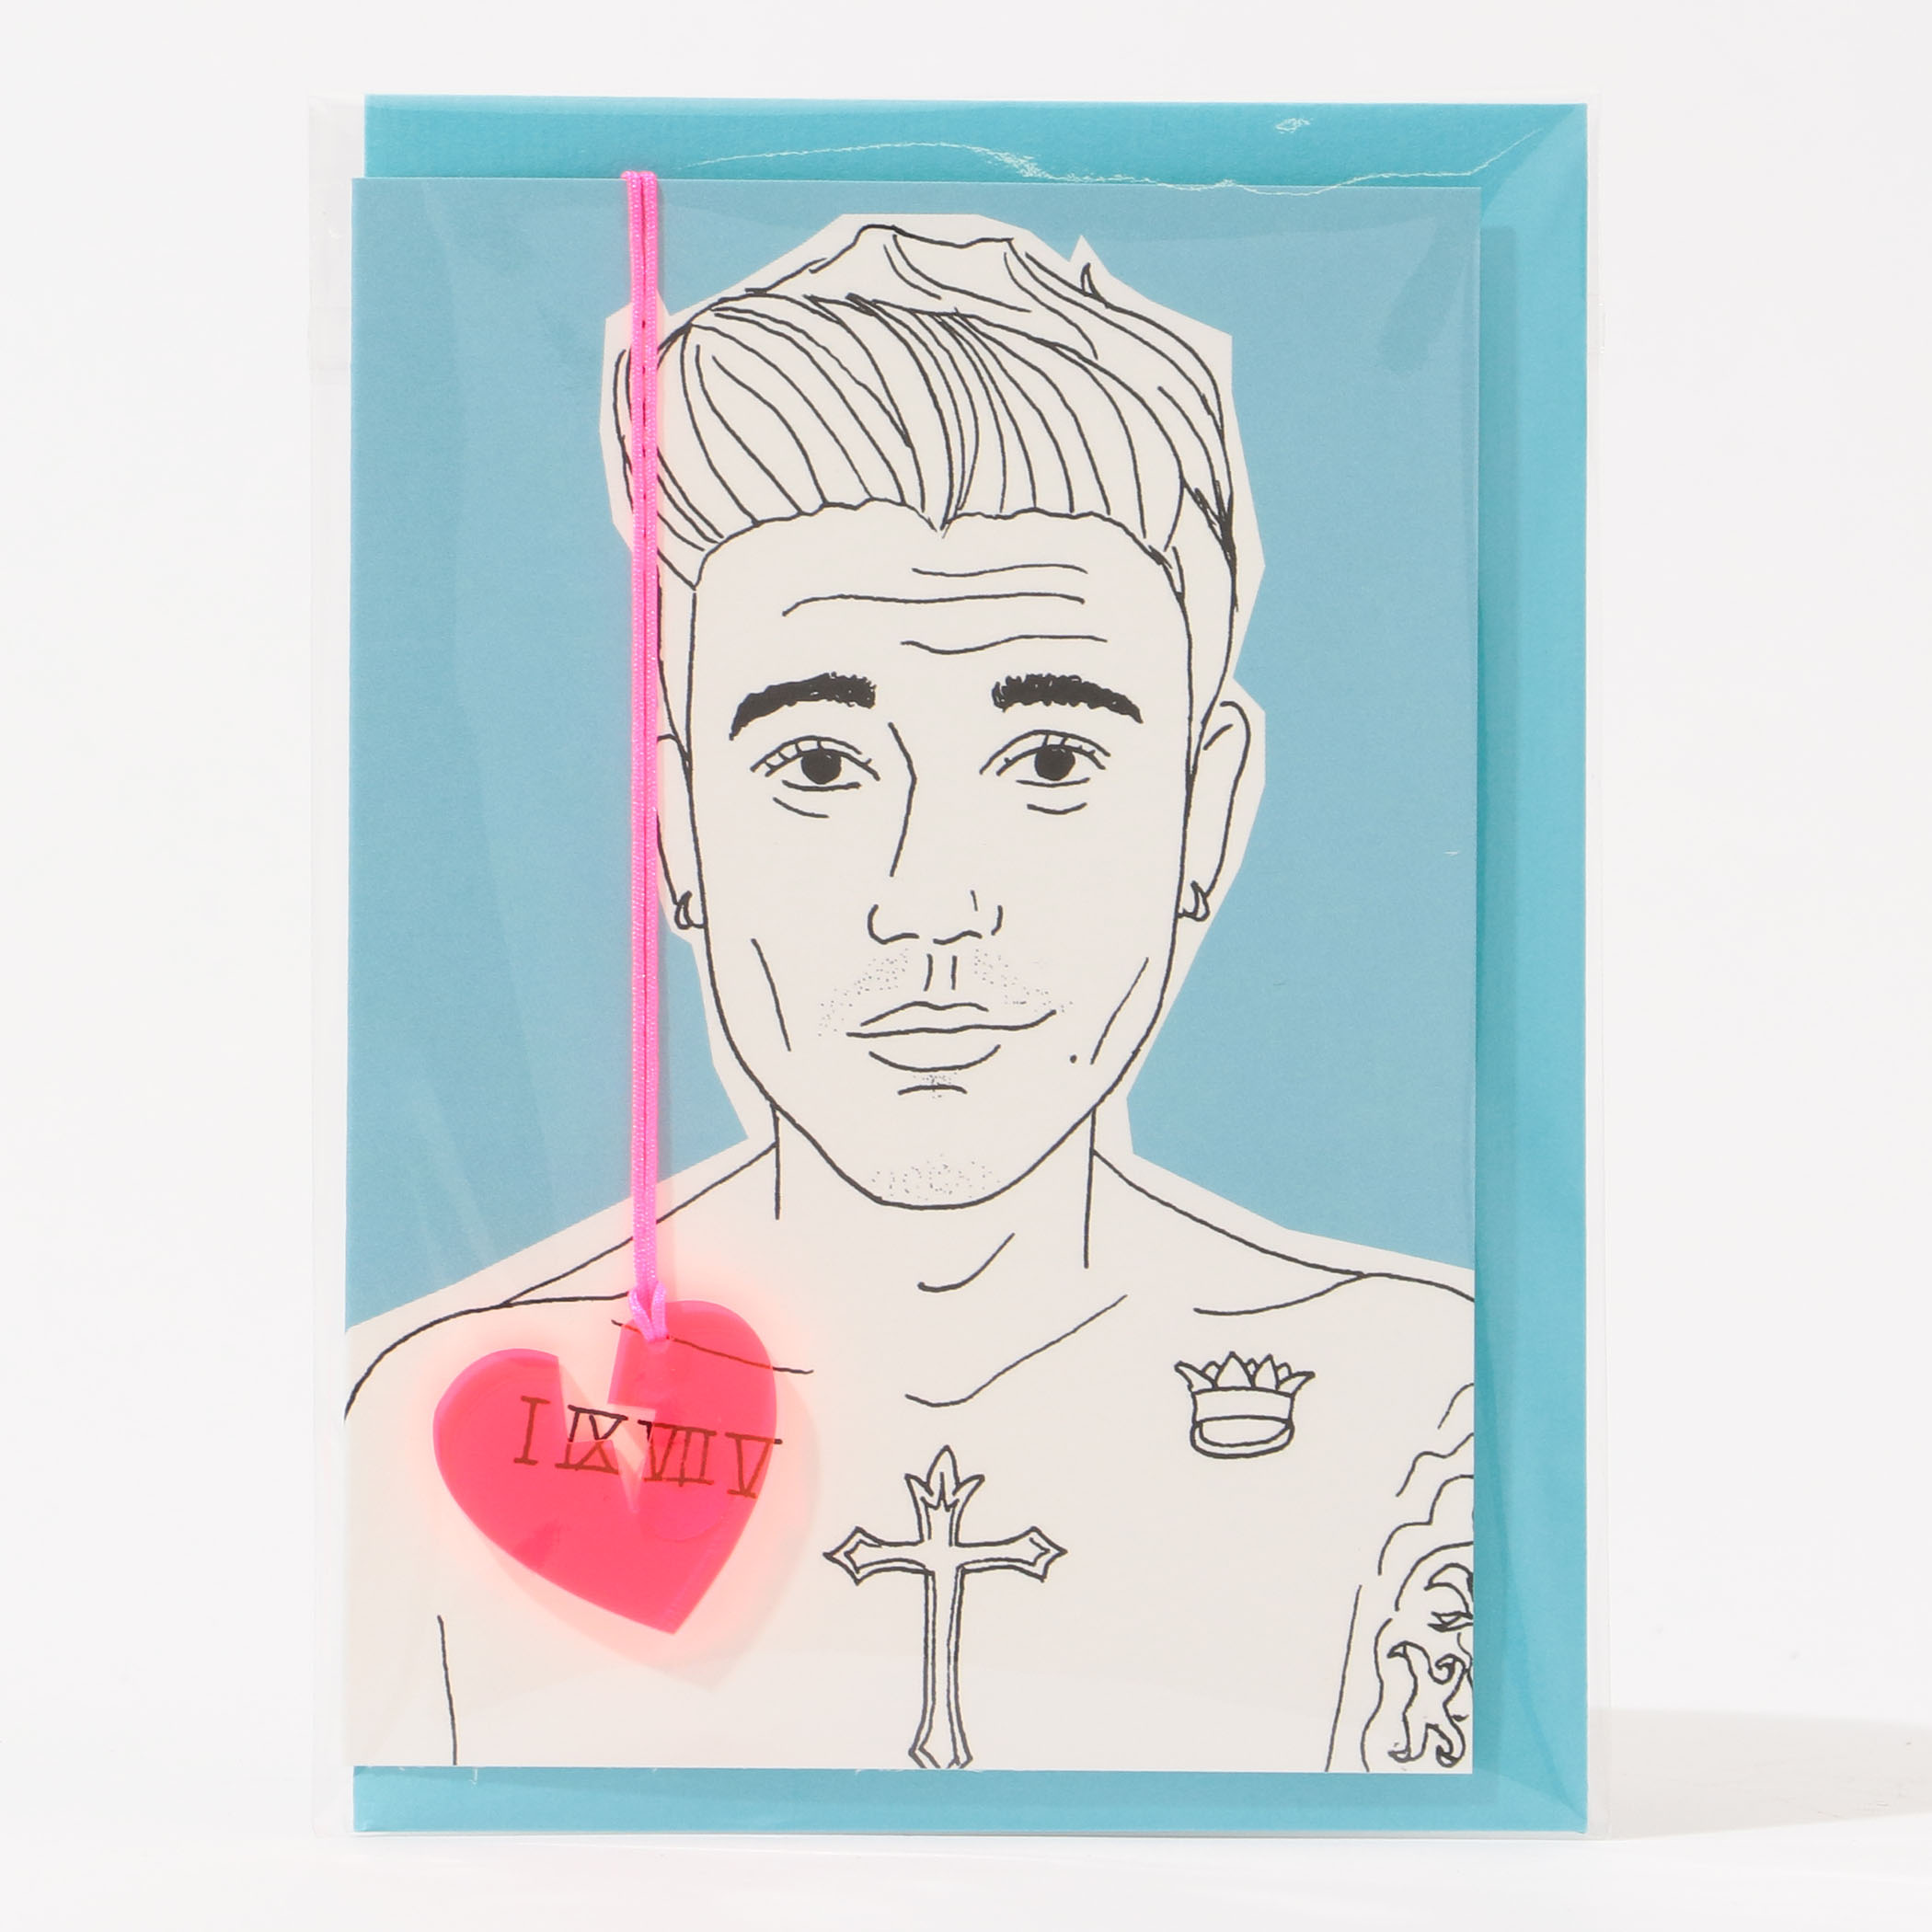 THE BUTTIQUE  Justin GIFT CARD